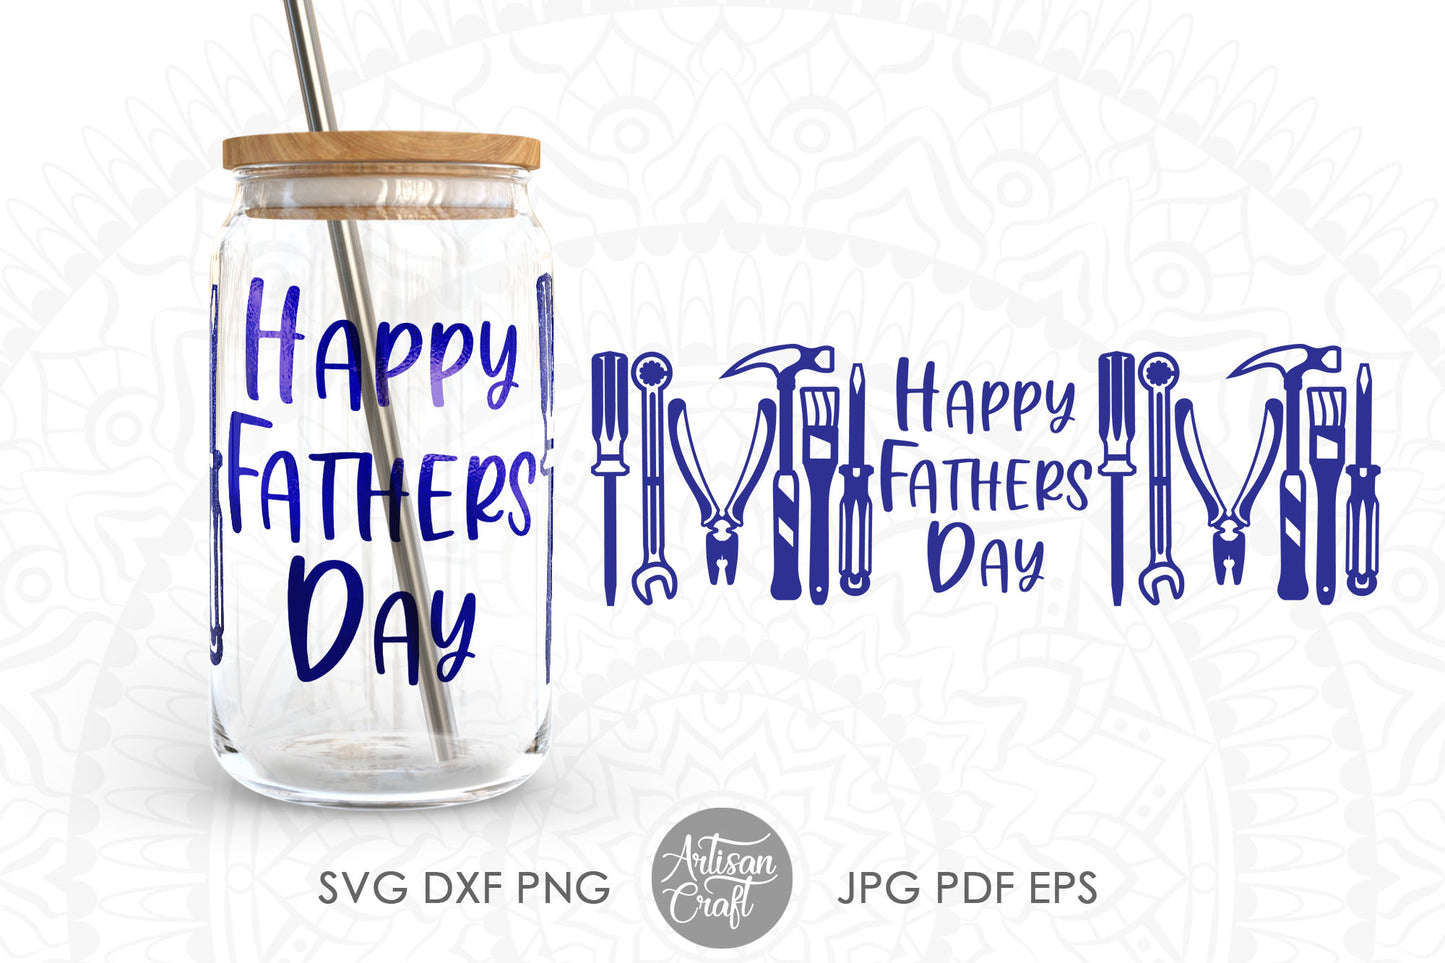 Can Glass SVG for fathers day with tools